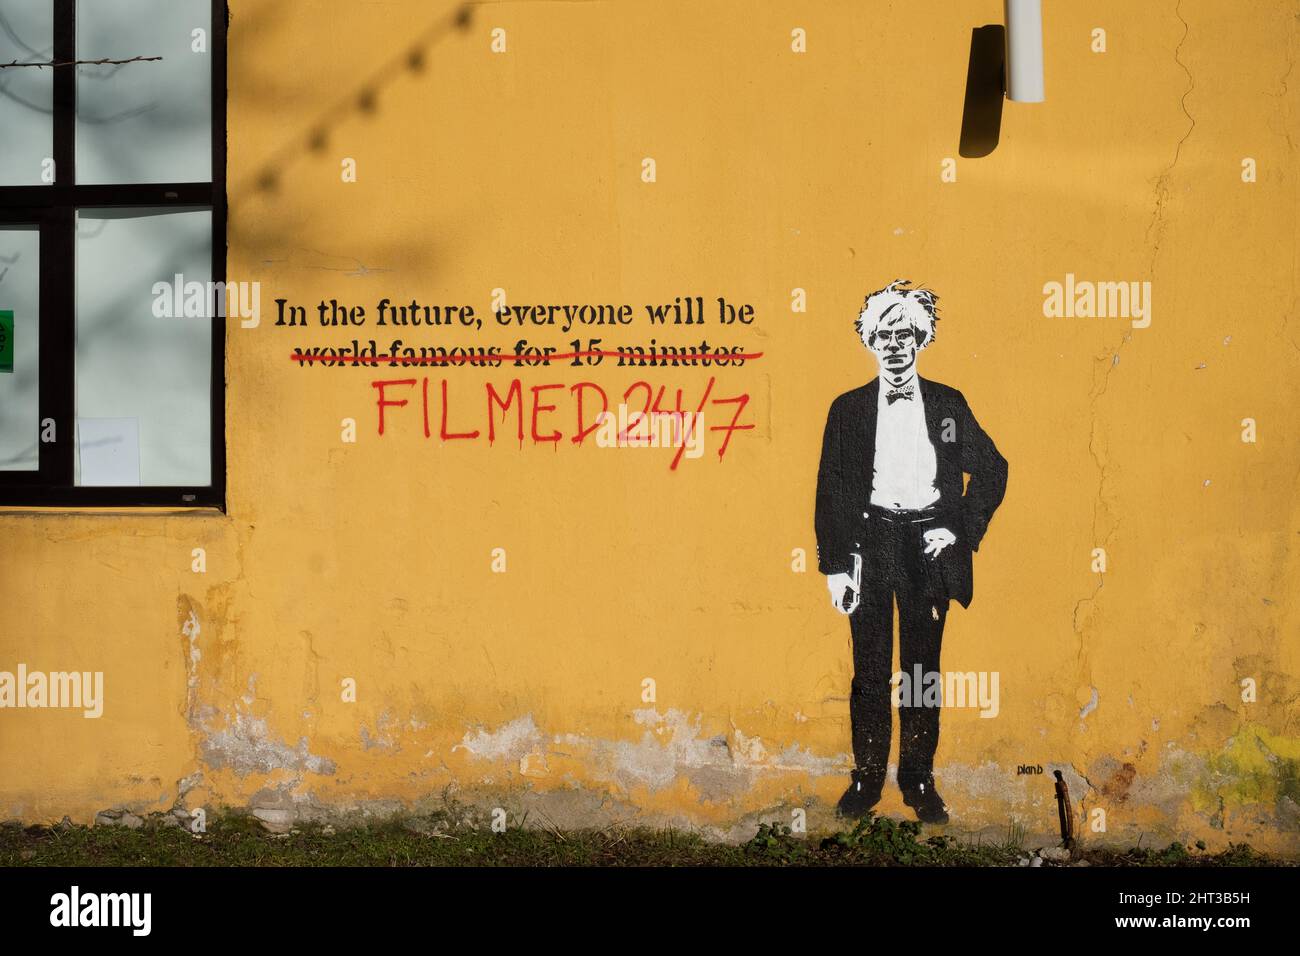 'In the future everyone will be filmed 24/7', crossed out 'world-famous for 15 minutes'. Futuristic street art in Tallinn by Plan B. Stock Photo